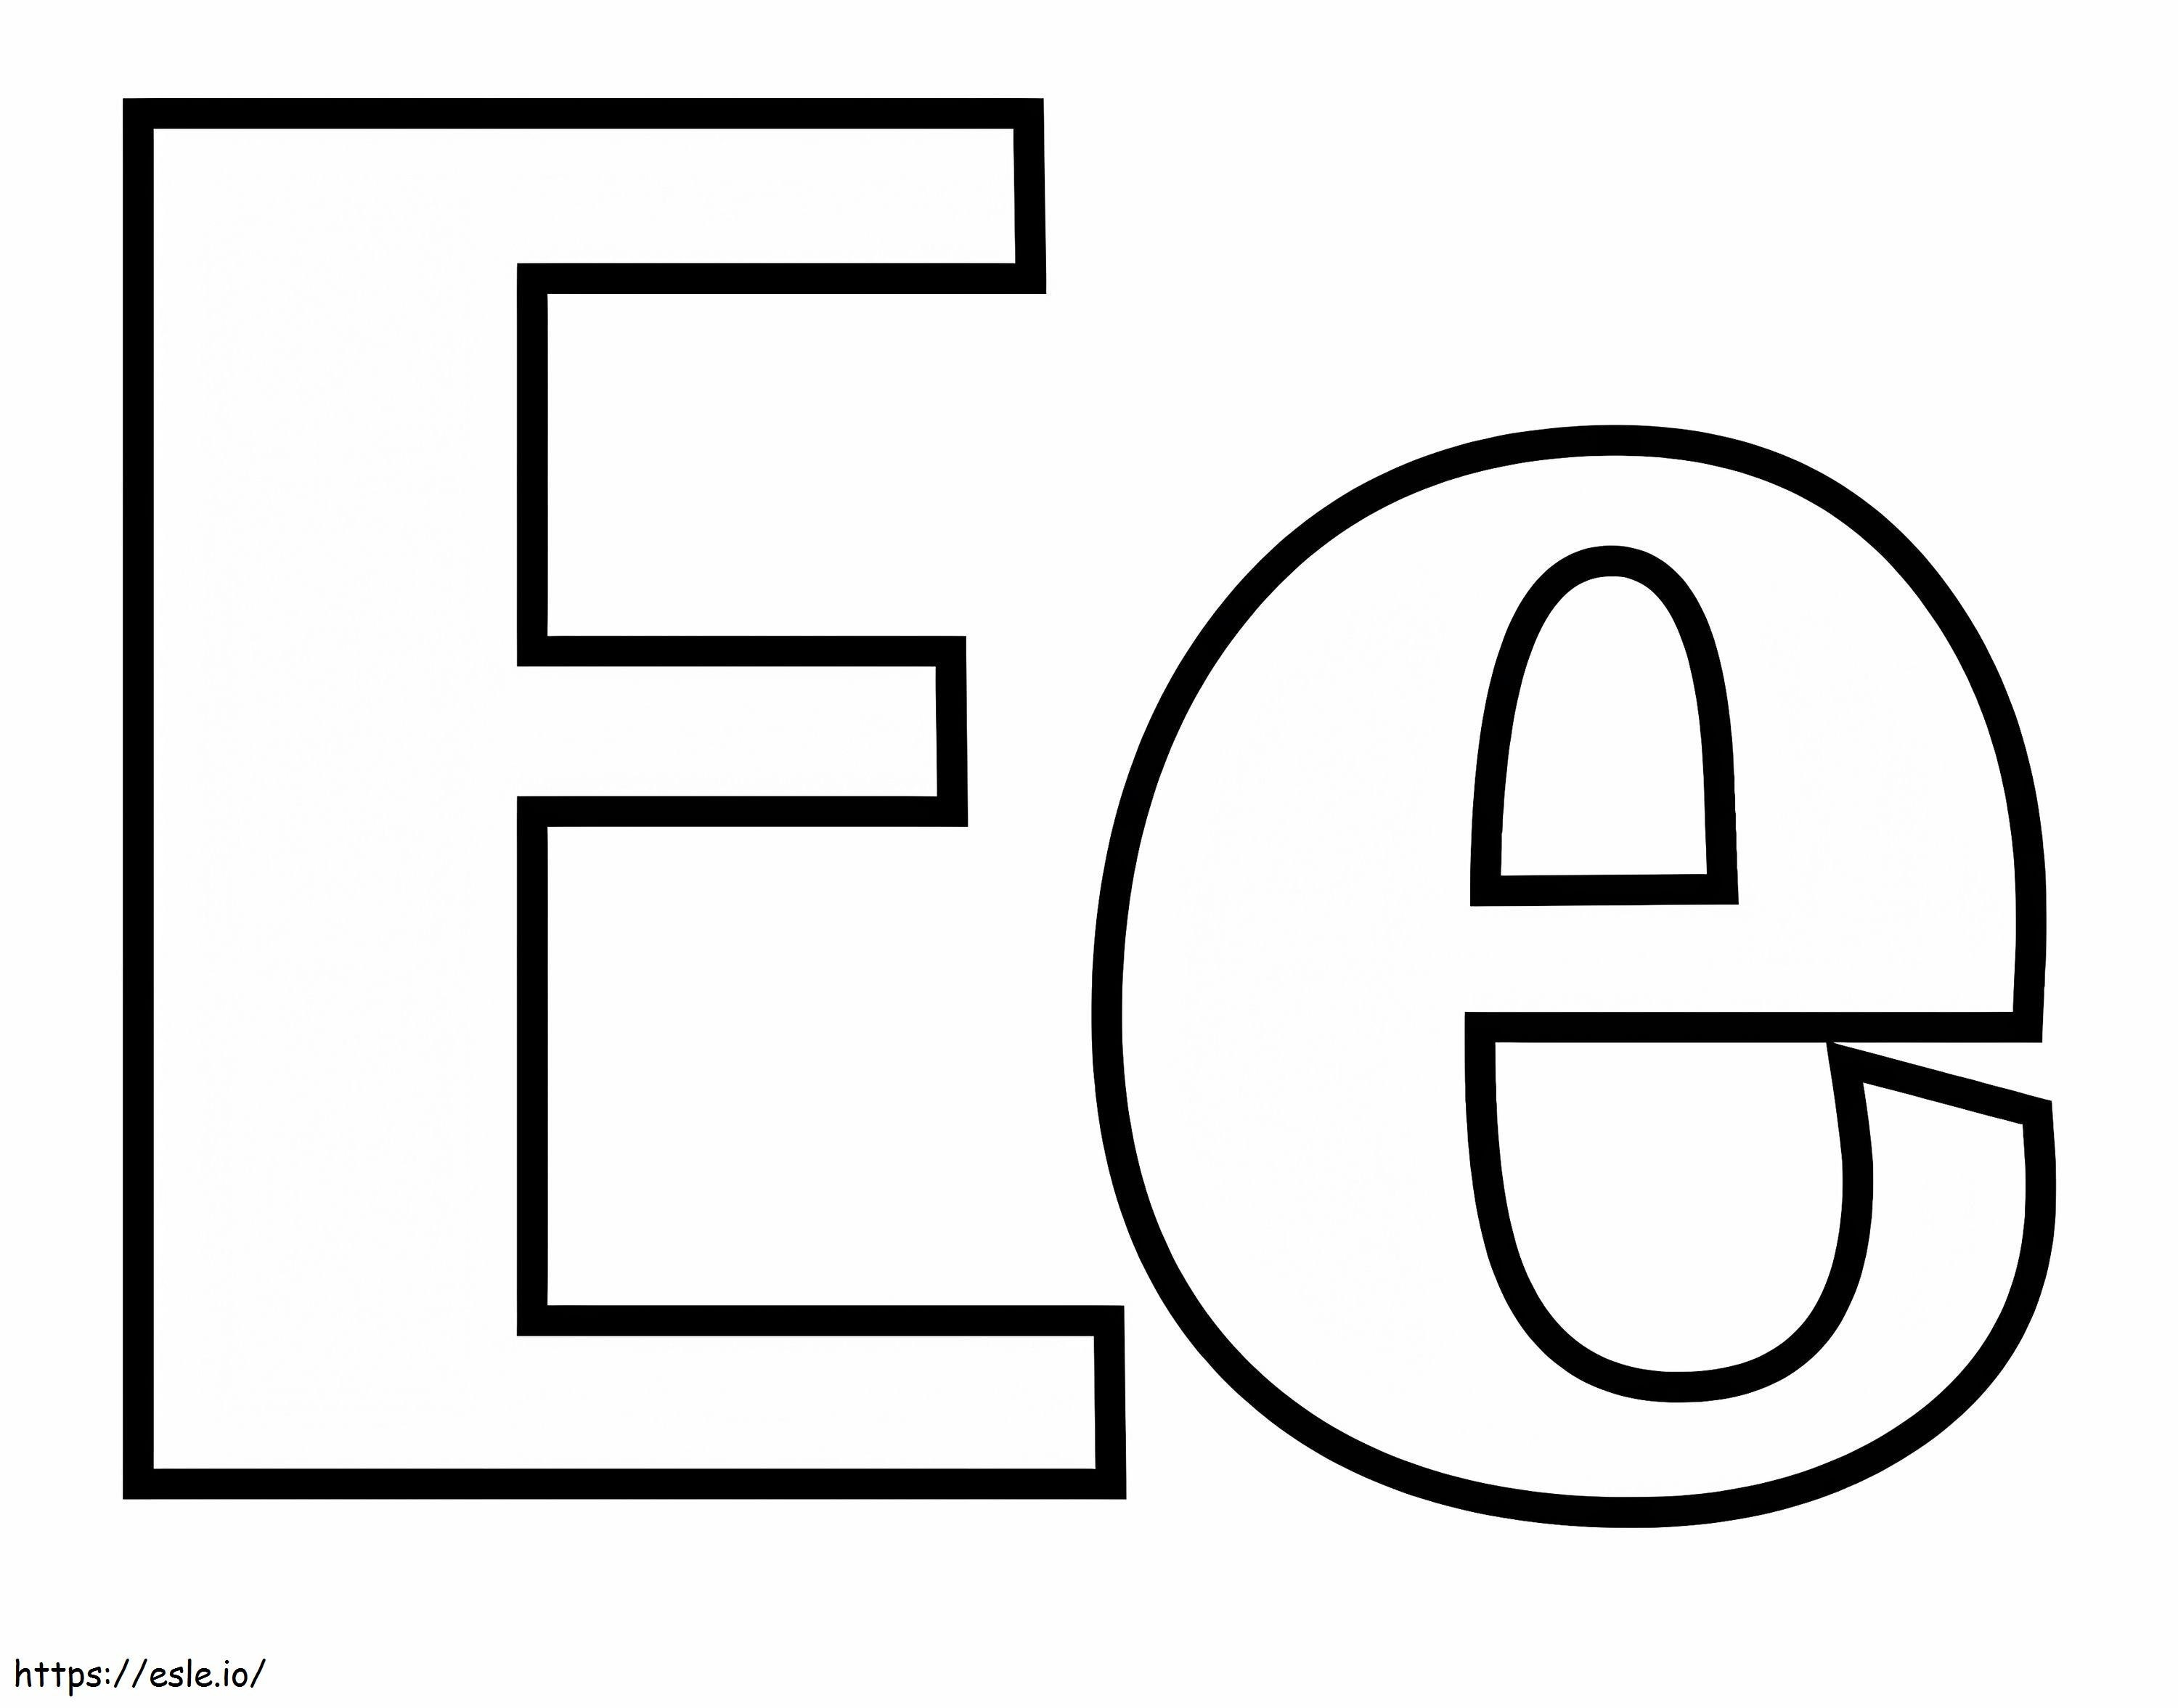 Letter E 8 coloring page